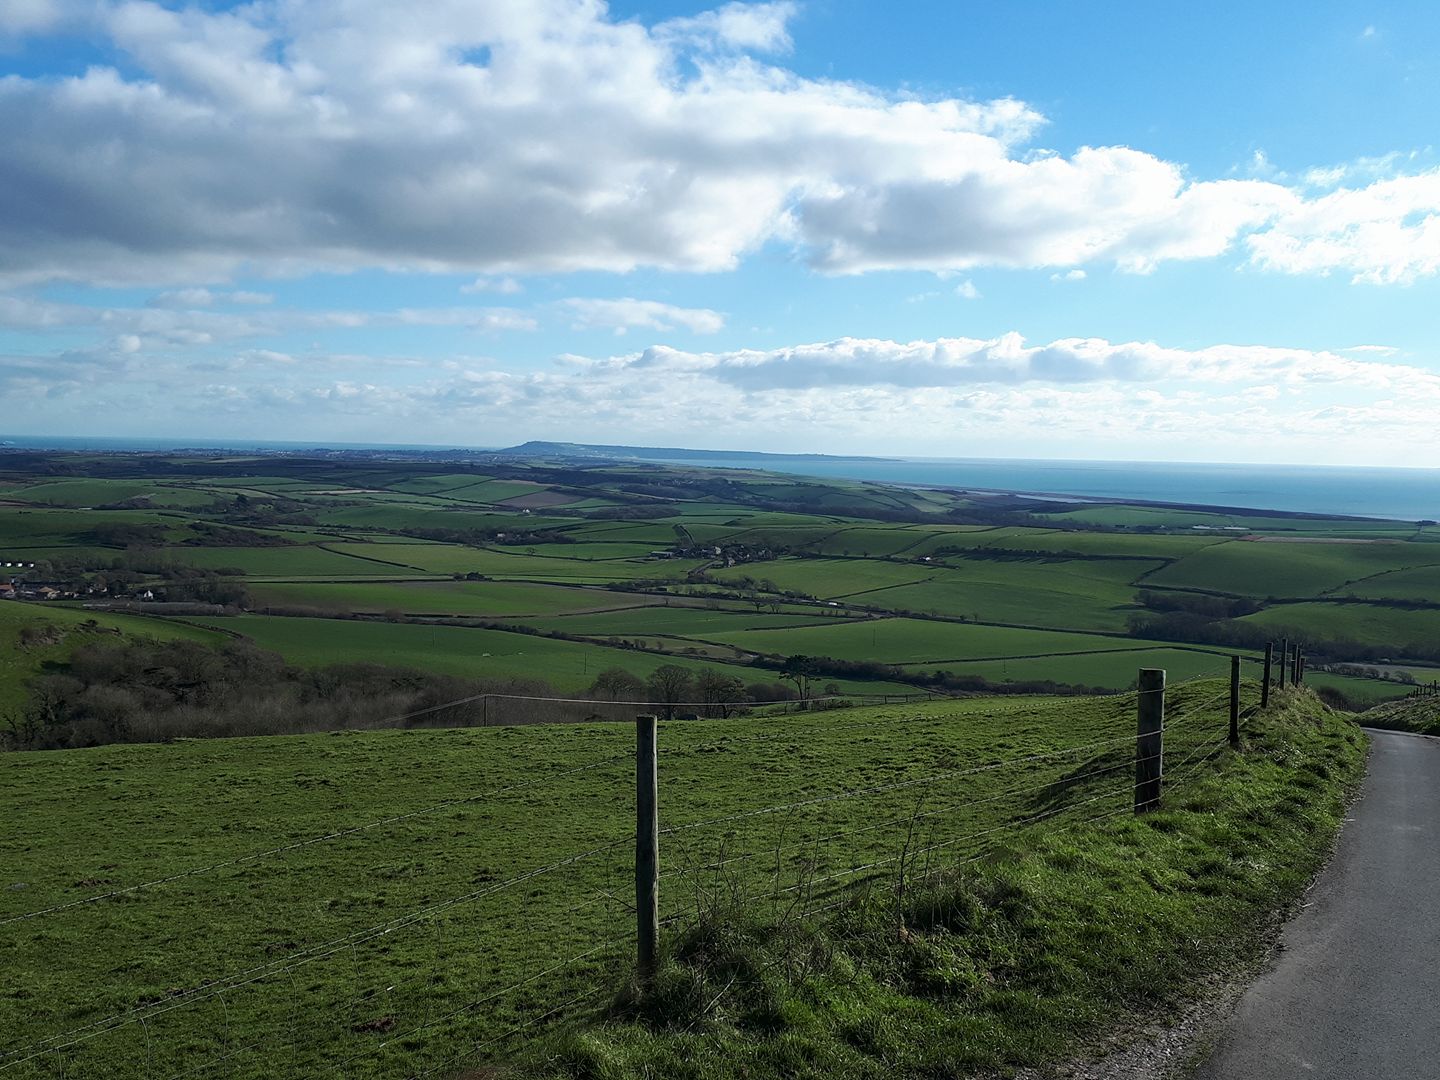 Chesil Beach and countryside views